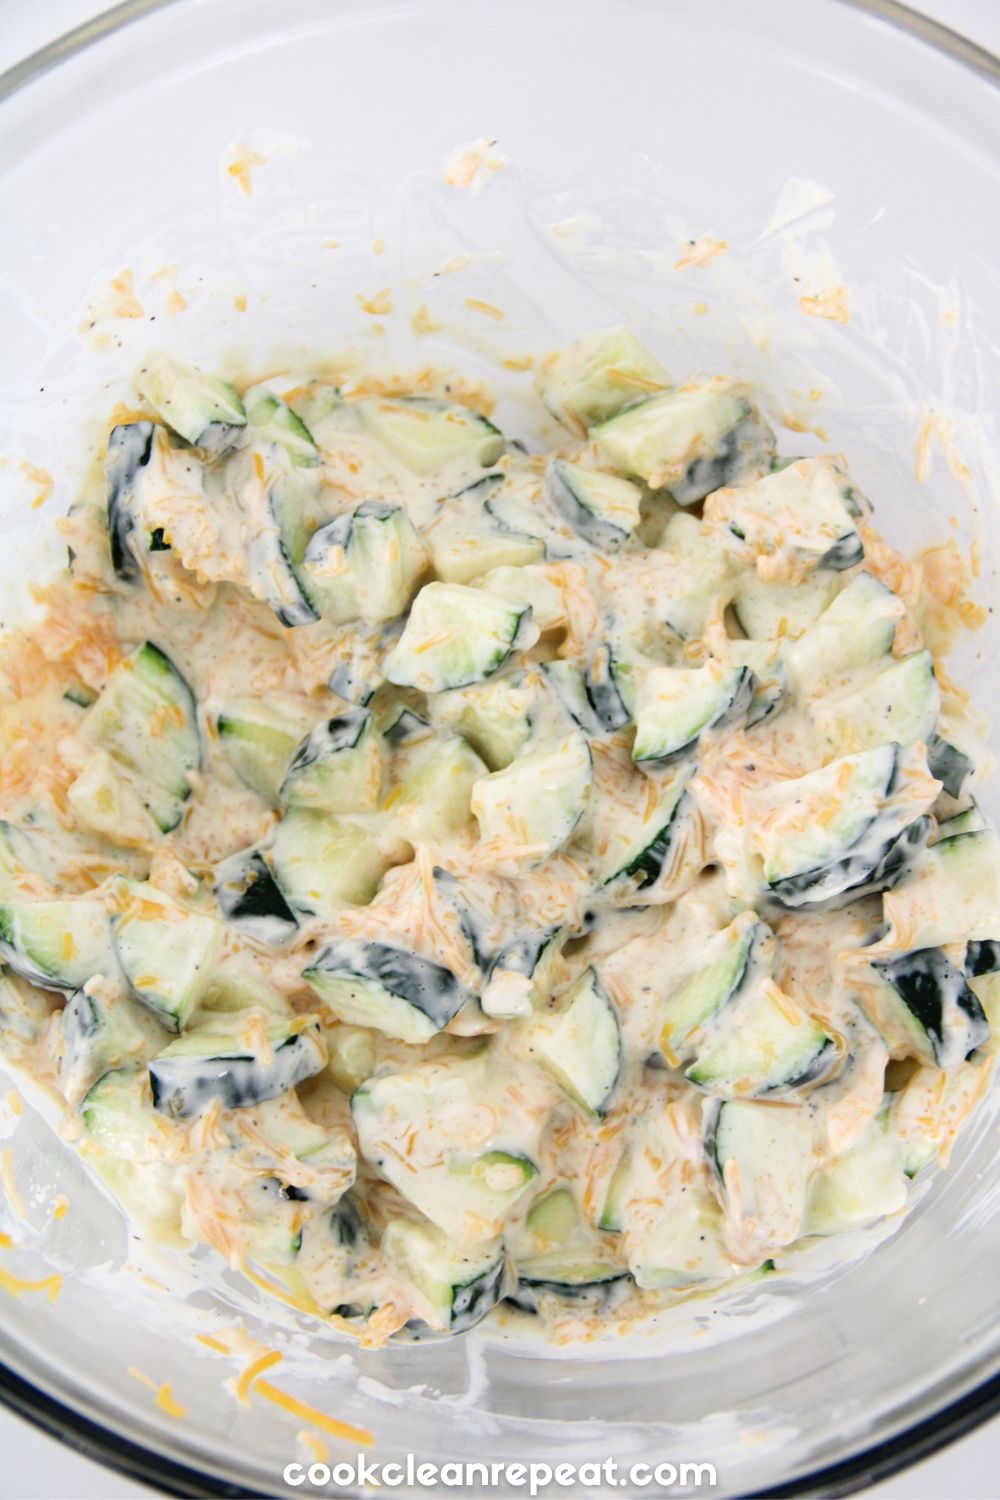 ingredients for this zucchini casserole recipe being mixed together in a bowl